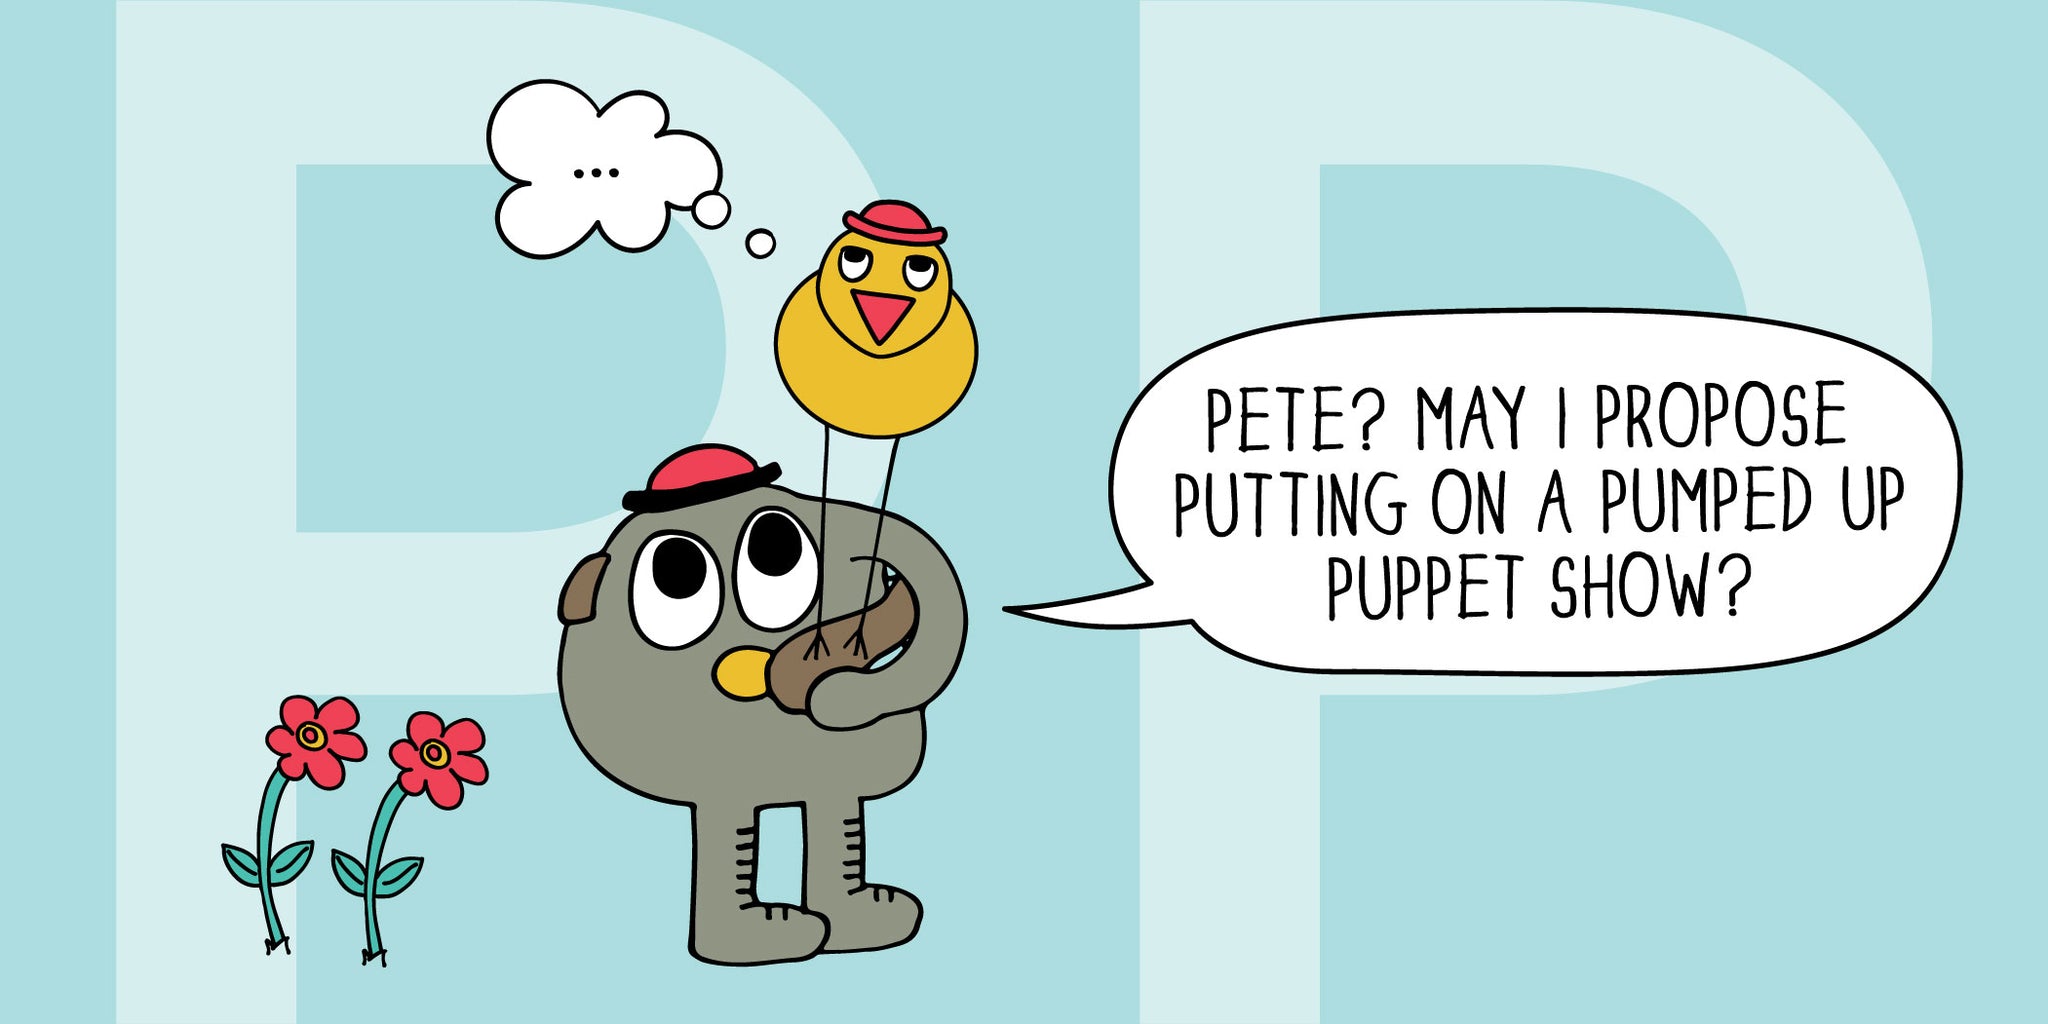 Pete, the puppeteer wants to please his pal Pete, "Pete? May I propose putting on a pumped up puppet show?"